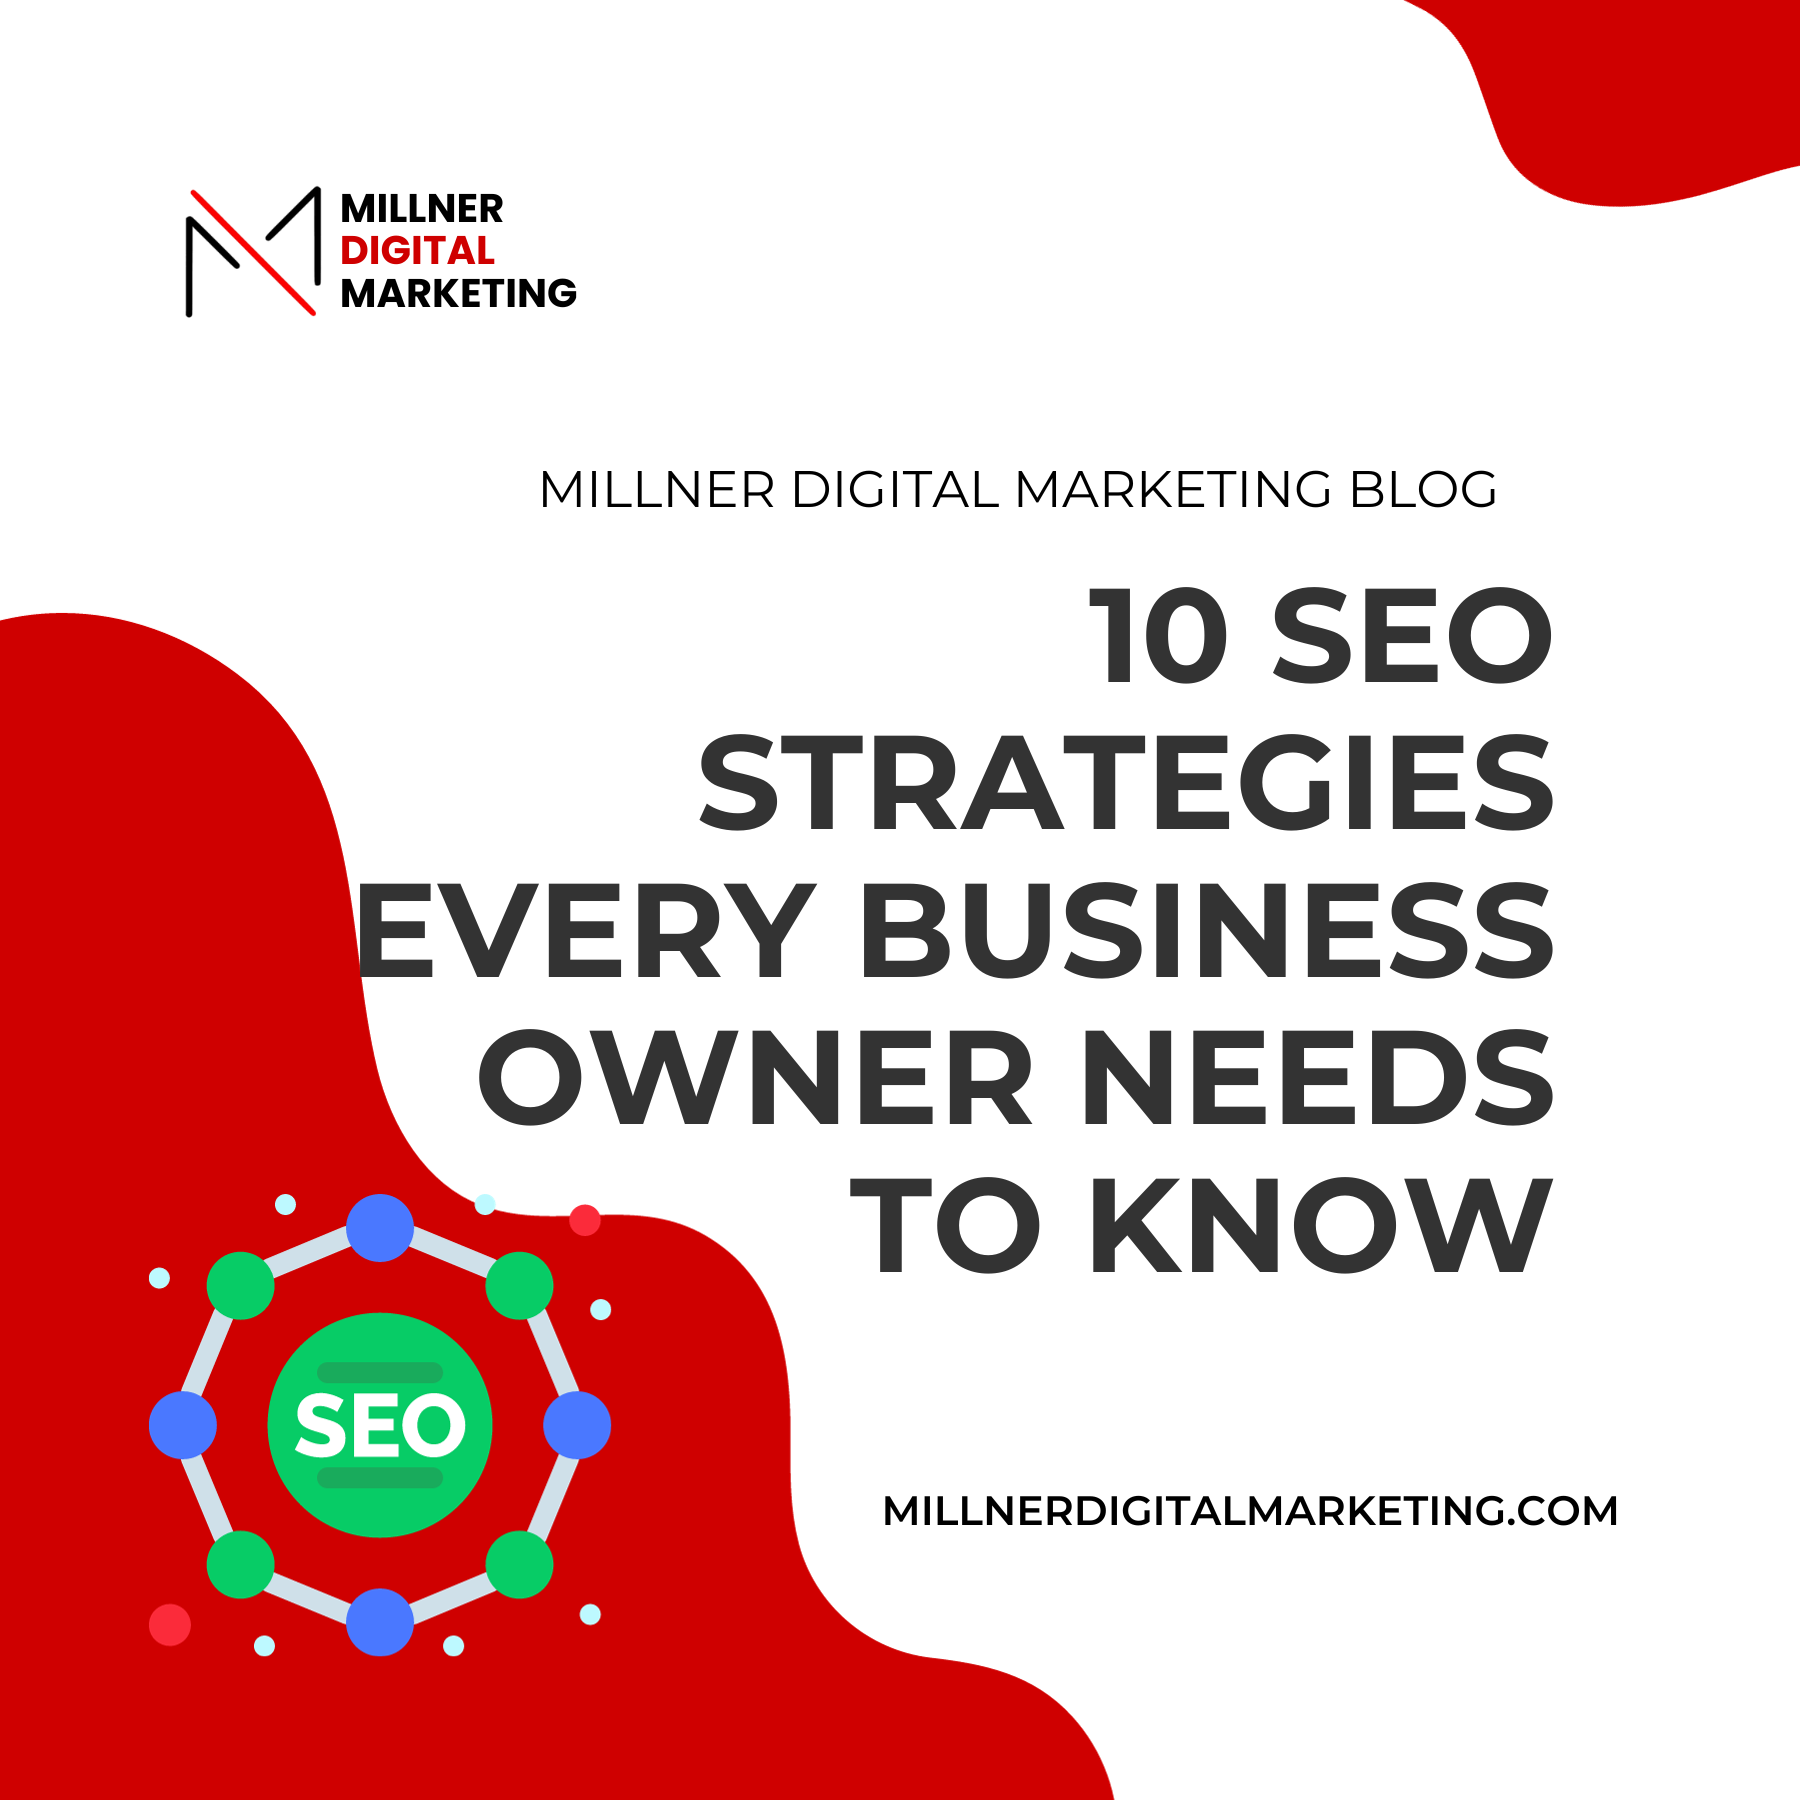 Blog post thumbnail photo about the 10 SEO strategies every business owner should know